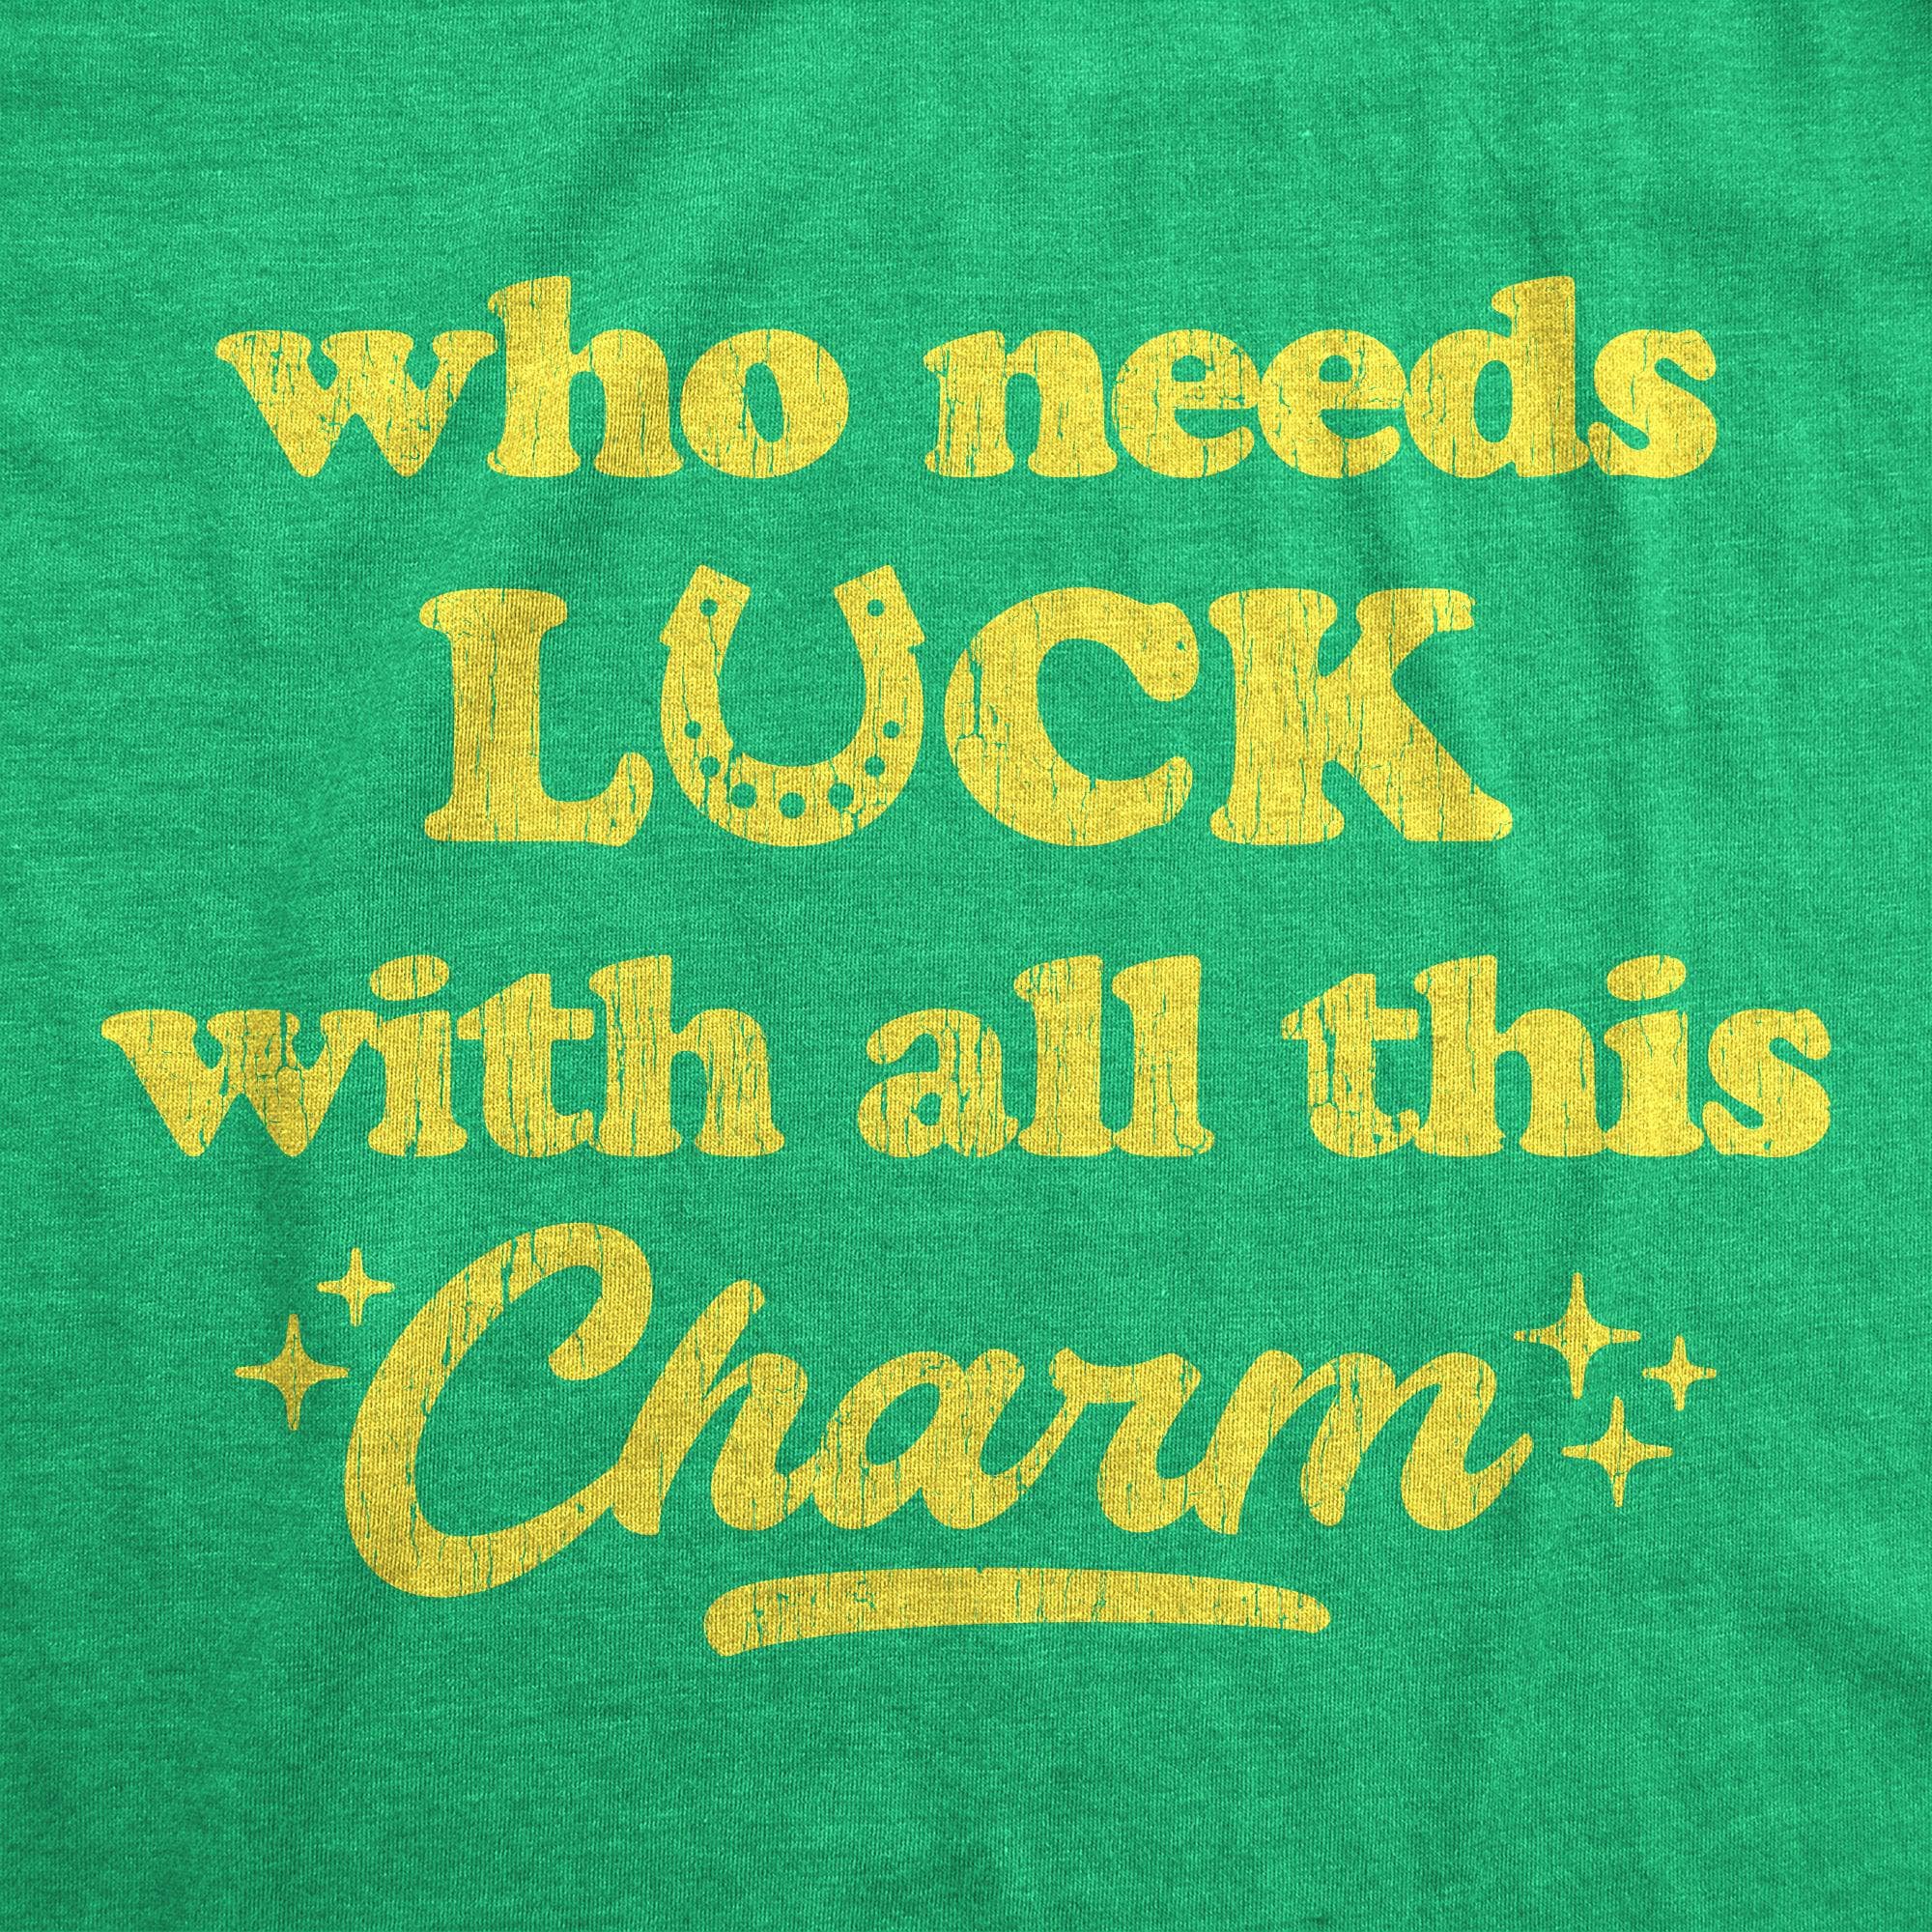 Who Needs Luck With All This Charm Men's Tshirt  -  Crazy Dog T-Shirts